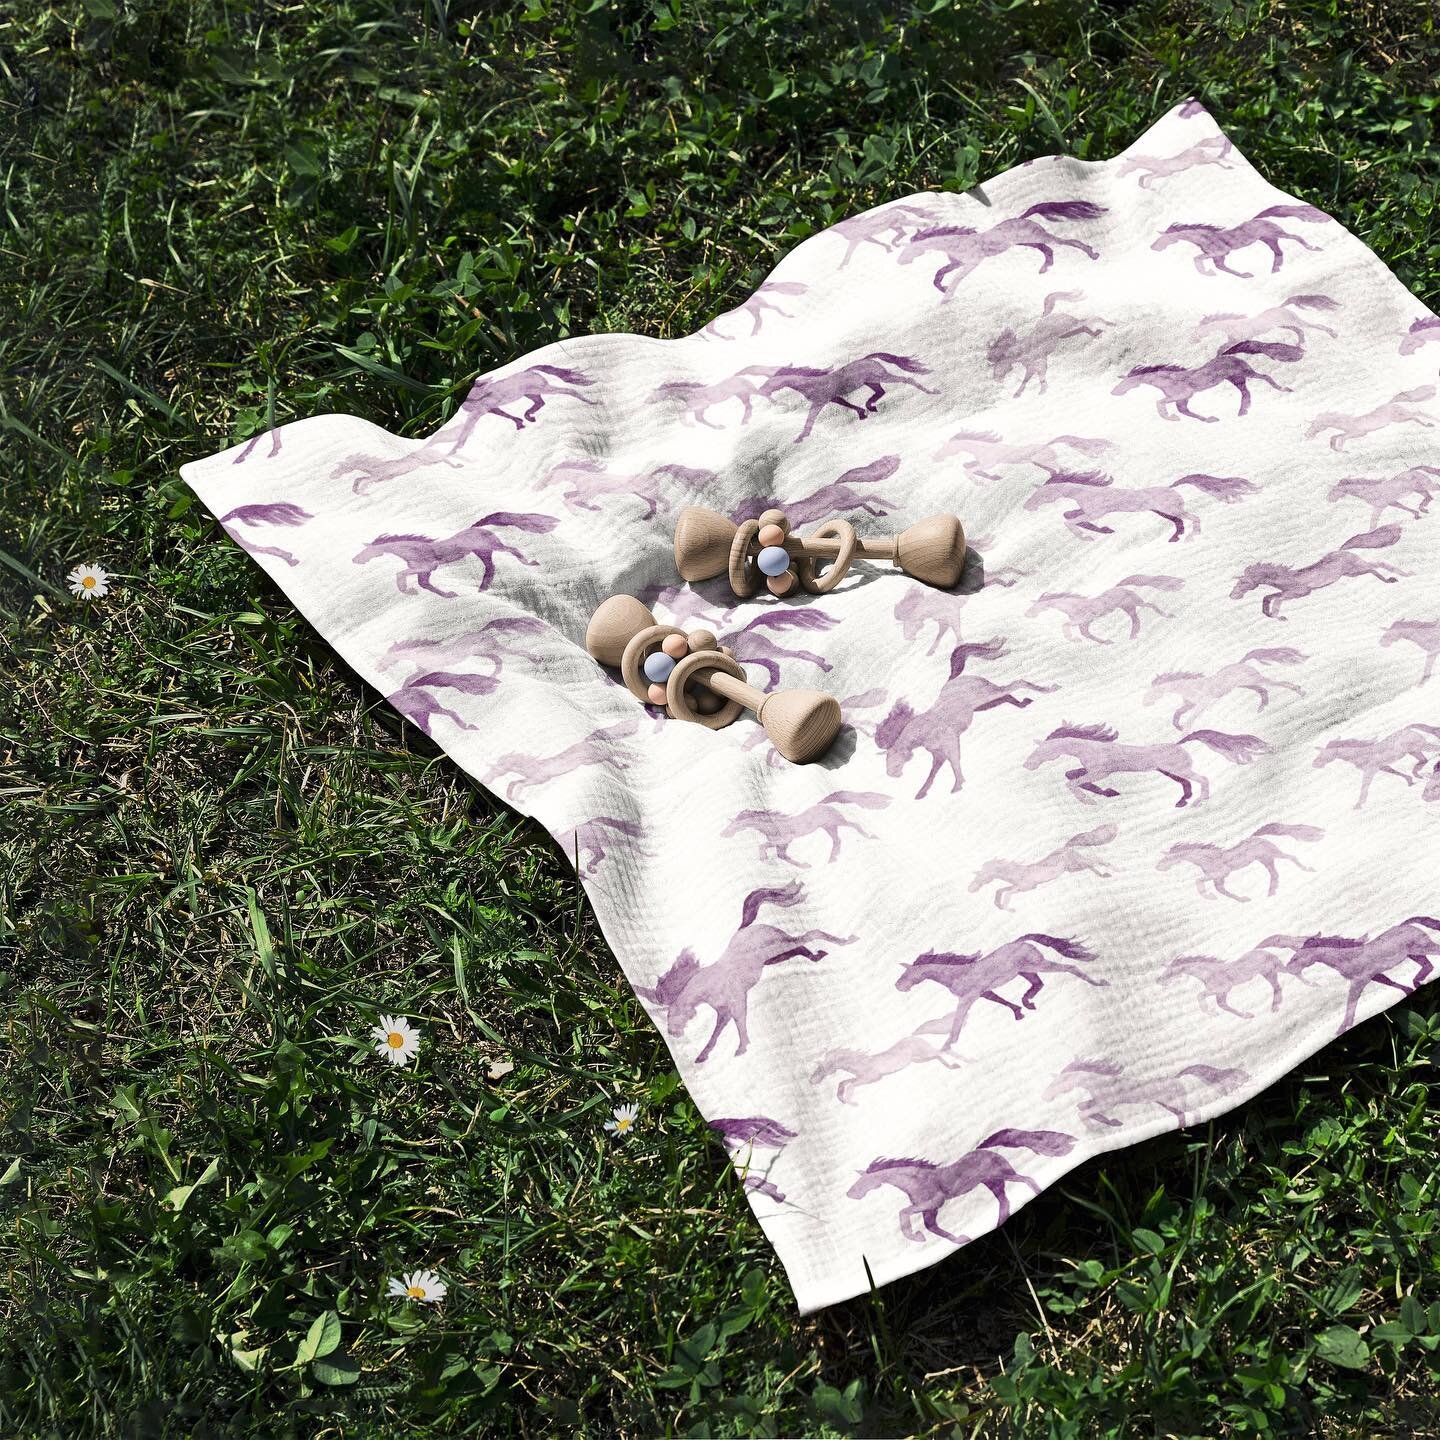 Little blanket with Watercolor Horses 🦄 

If you like this design, it&rsquo;ll be available on March 1st exclusively through @naturalrootsfabric on their organic and natural fabrics. 

-

La petite doudou &ldquo;chevaux aquarelle&rdquo; 🦄

Si tu ai